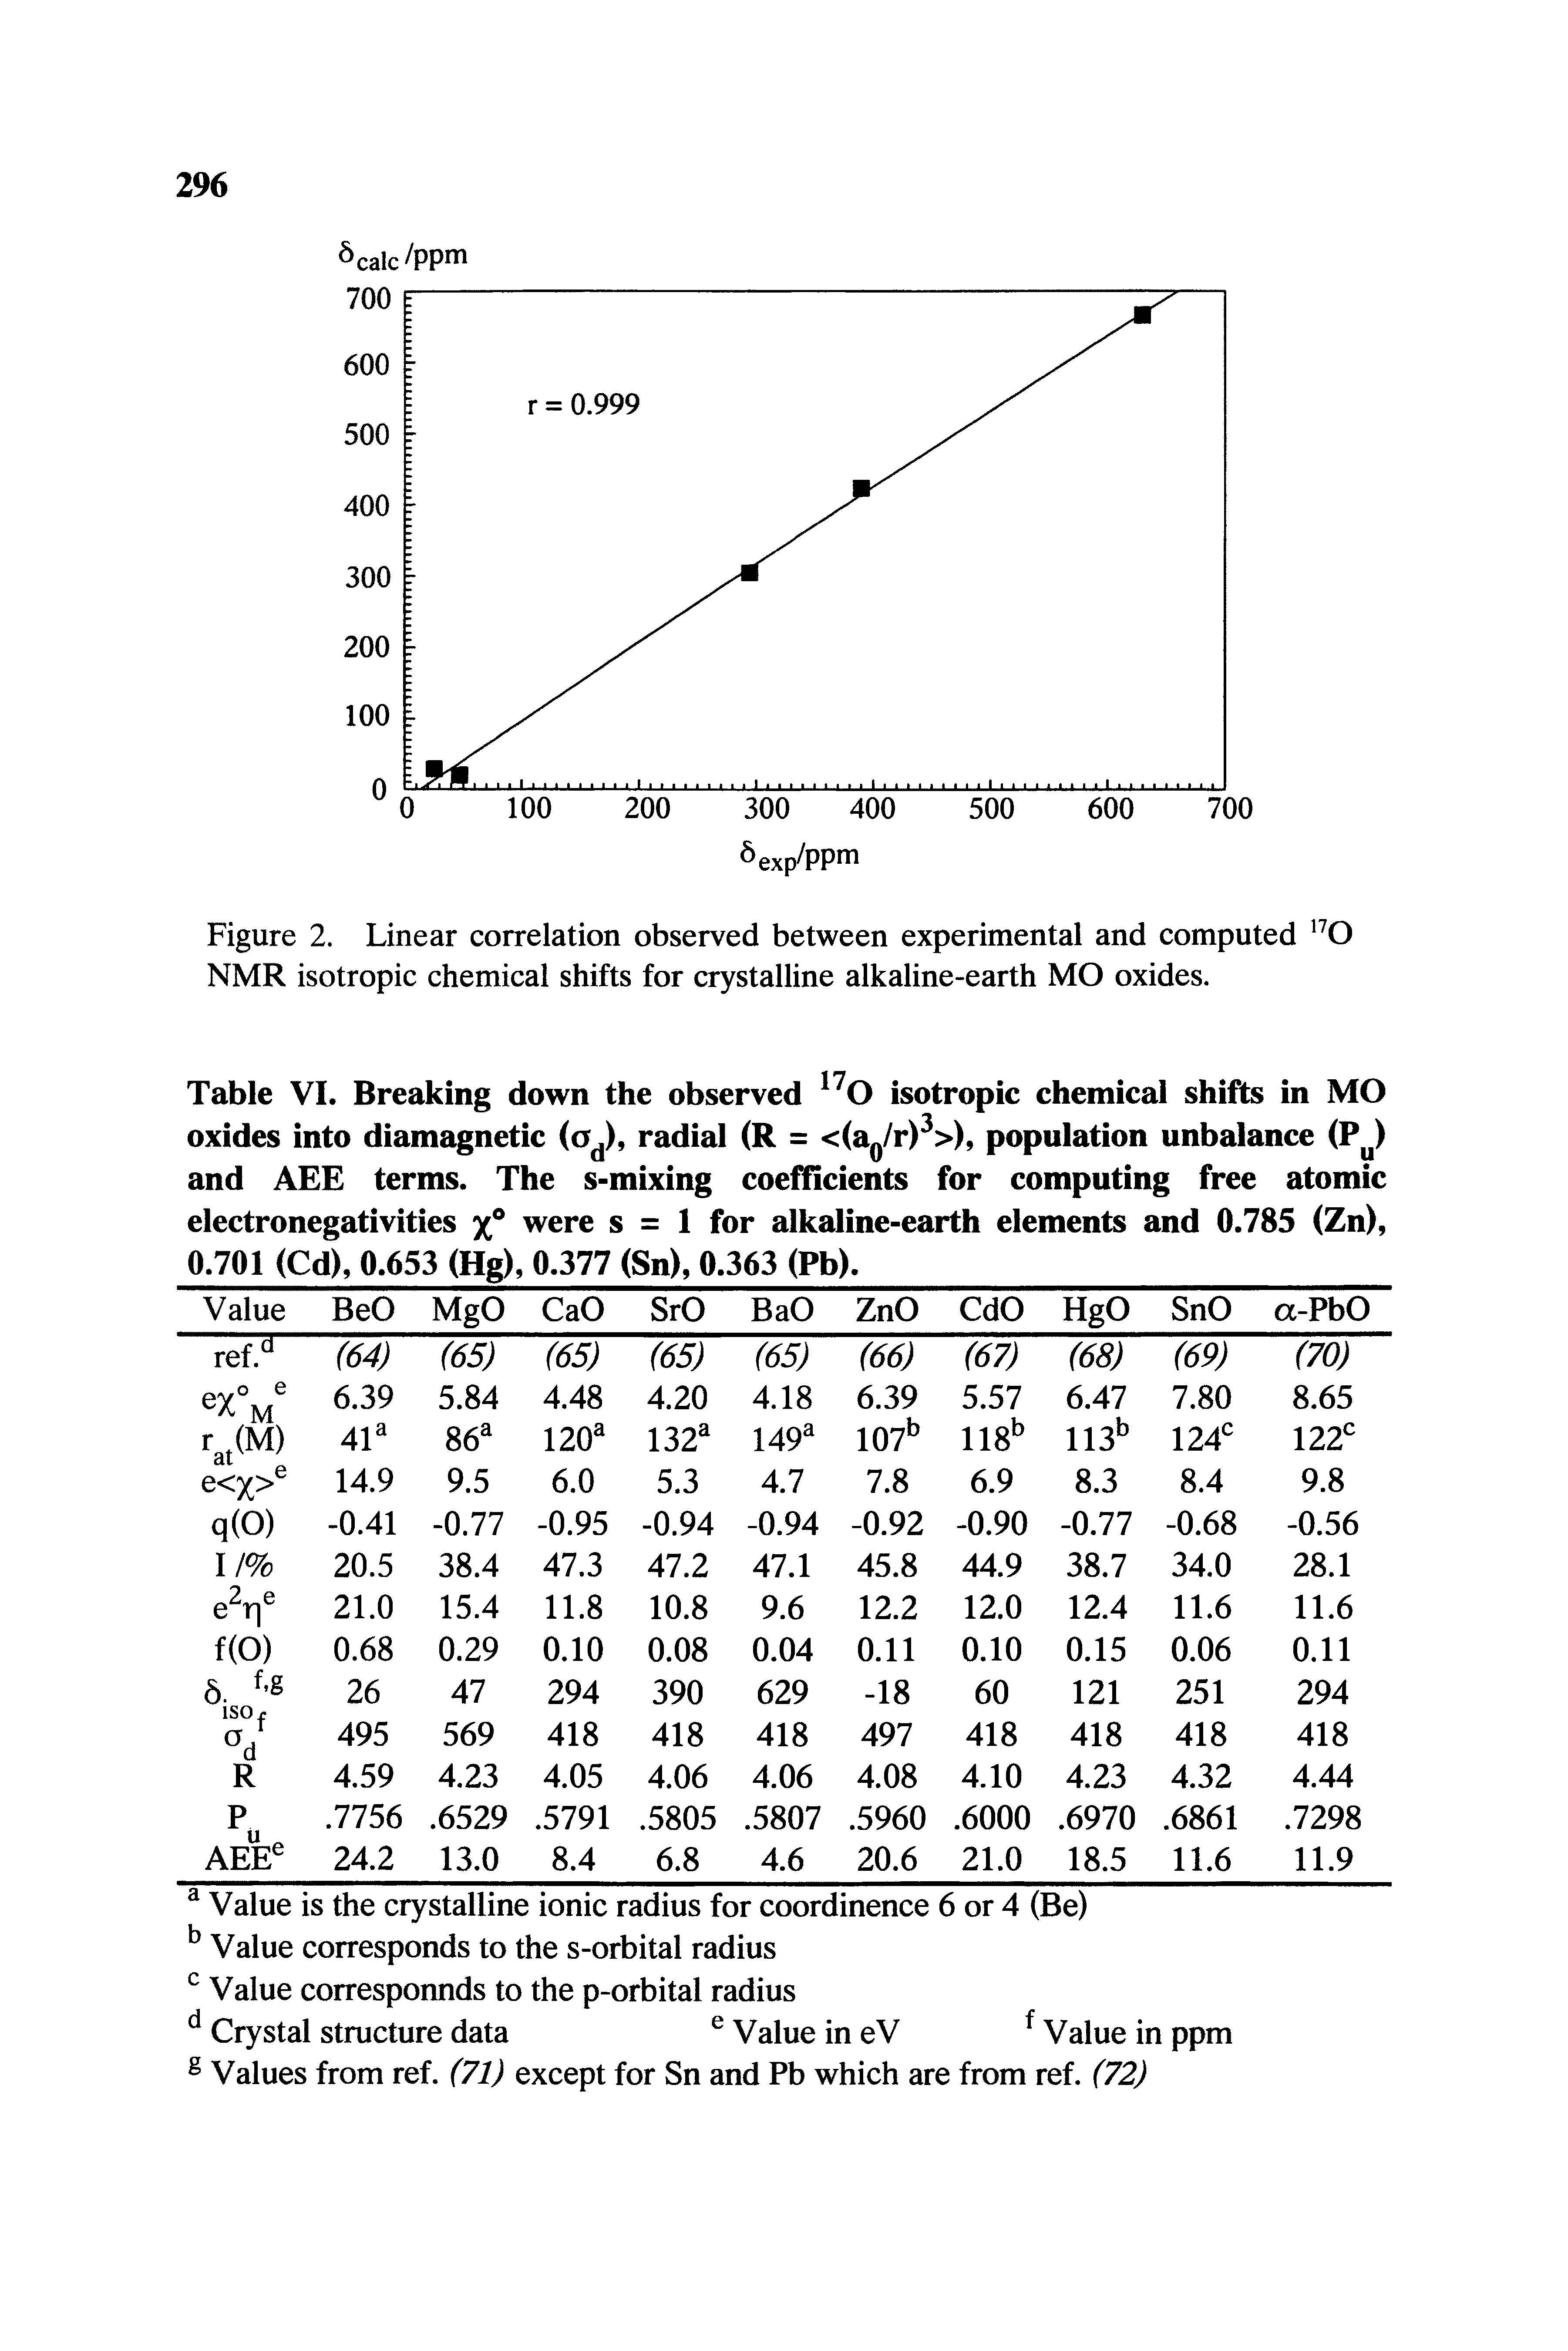 Table VI. Breaking down the observed 170 isotropic chemical shifts in MO oxides into diamagnetic (od), radial (R = <(aQ/r)3>), population unbalance (Pu) and AEE terms. The s-mixing coefficients for computing free atomic electronegativities /° were s = 1 for alkaline-earth elements and 0.785 (Zn), 0.701 (Cd), 0.653 (Hg), 0.377 (Sn), 0.363 (Pb). ...